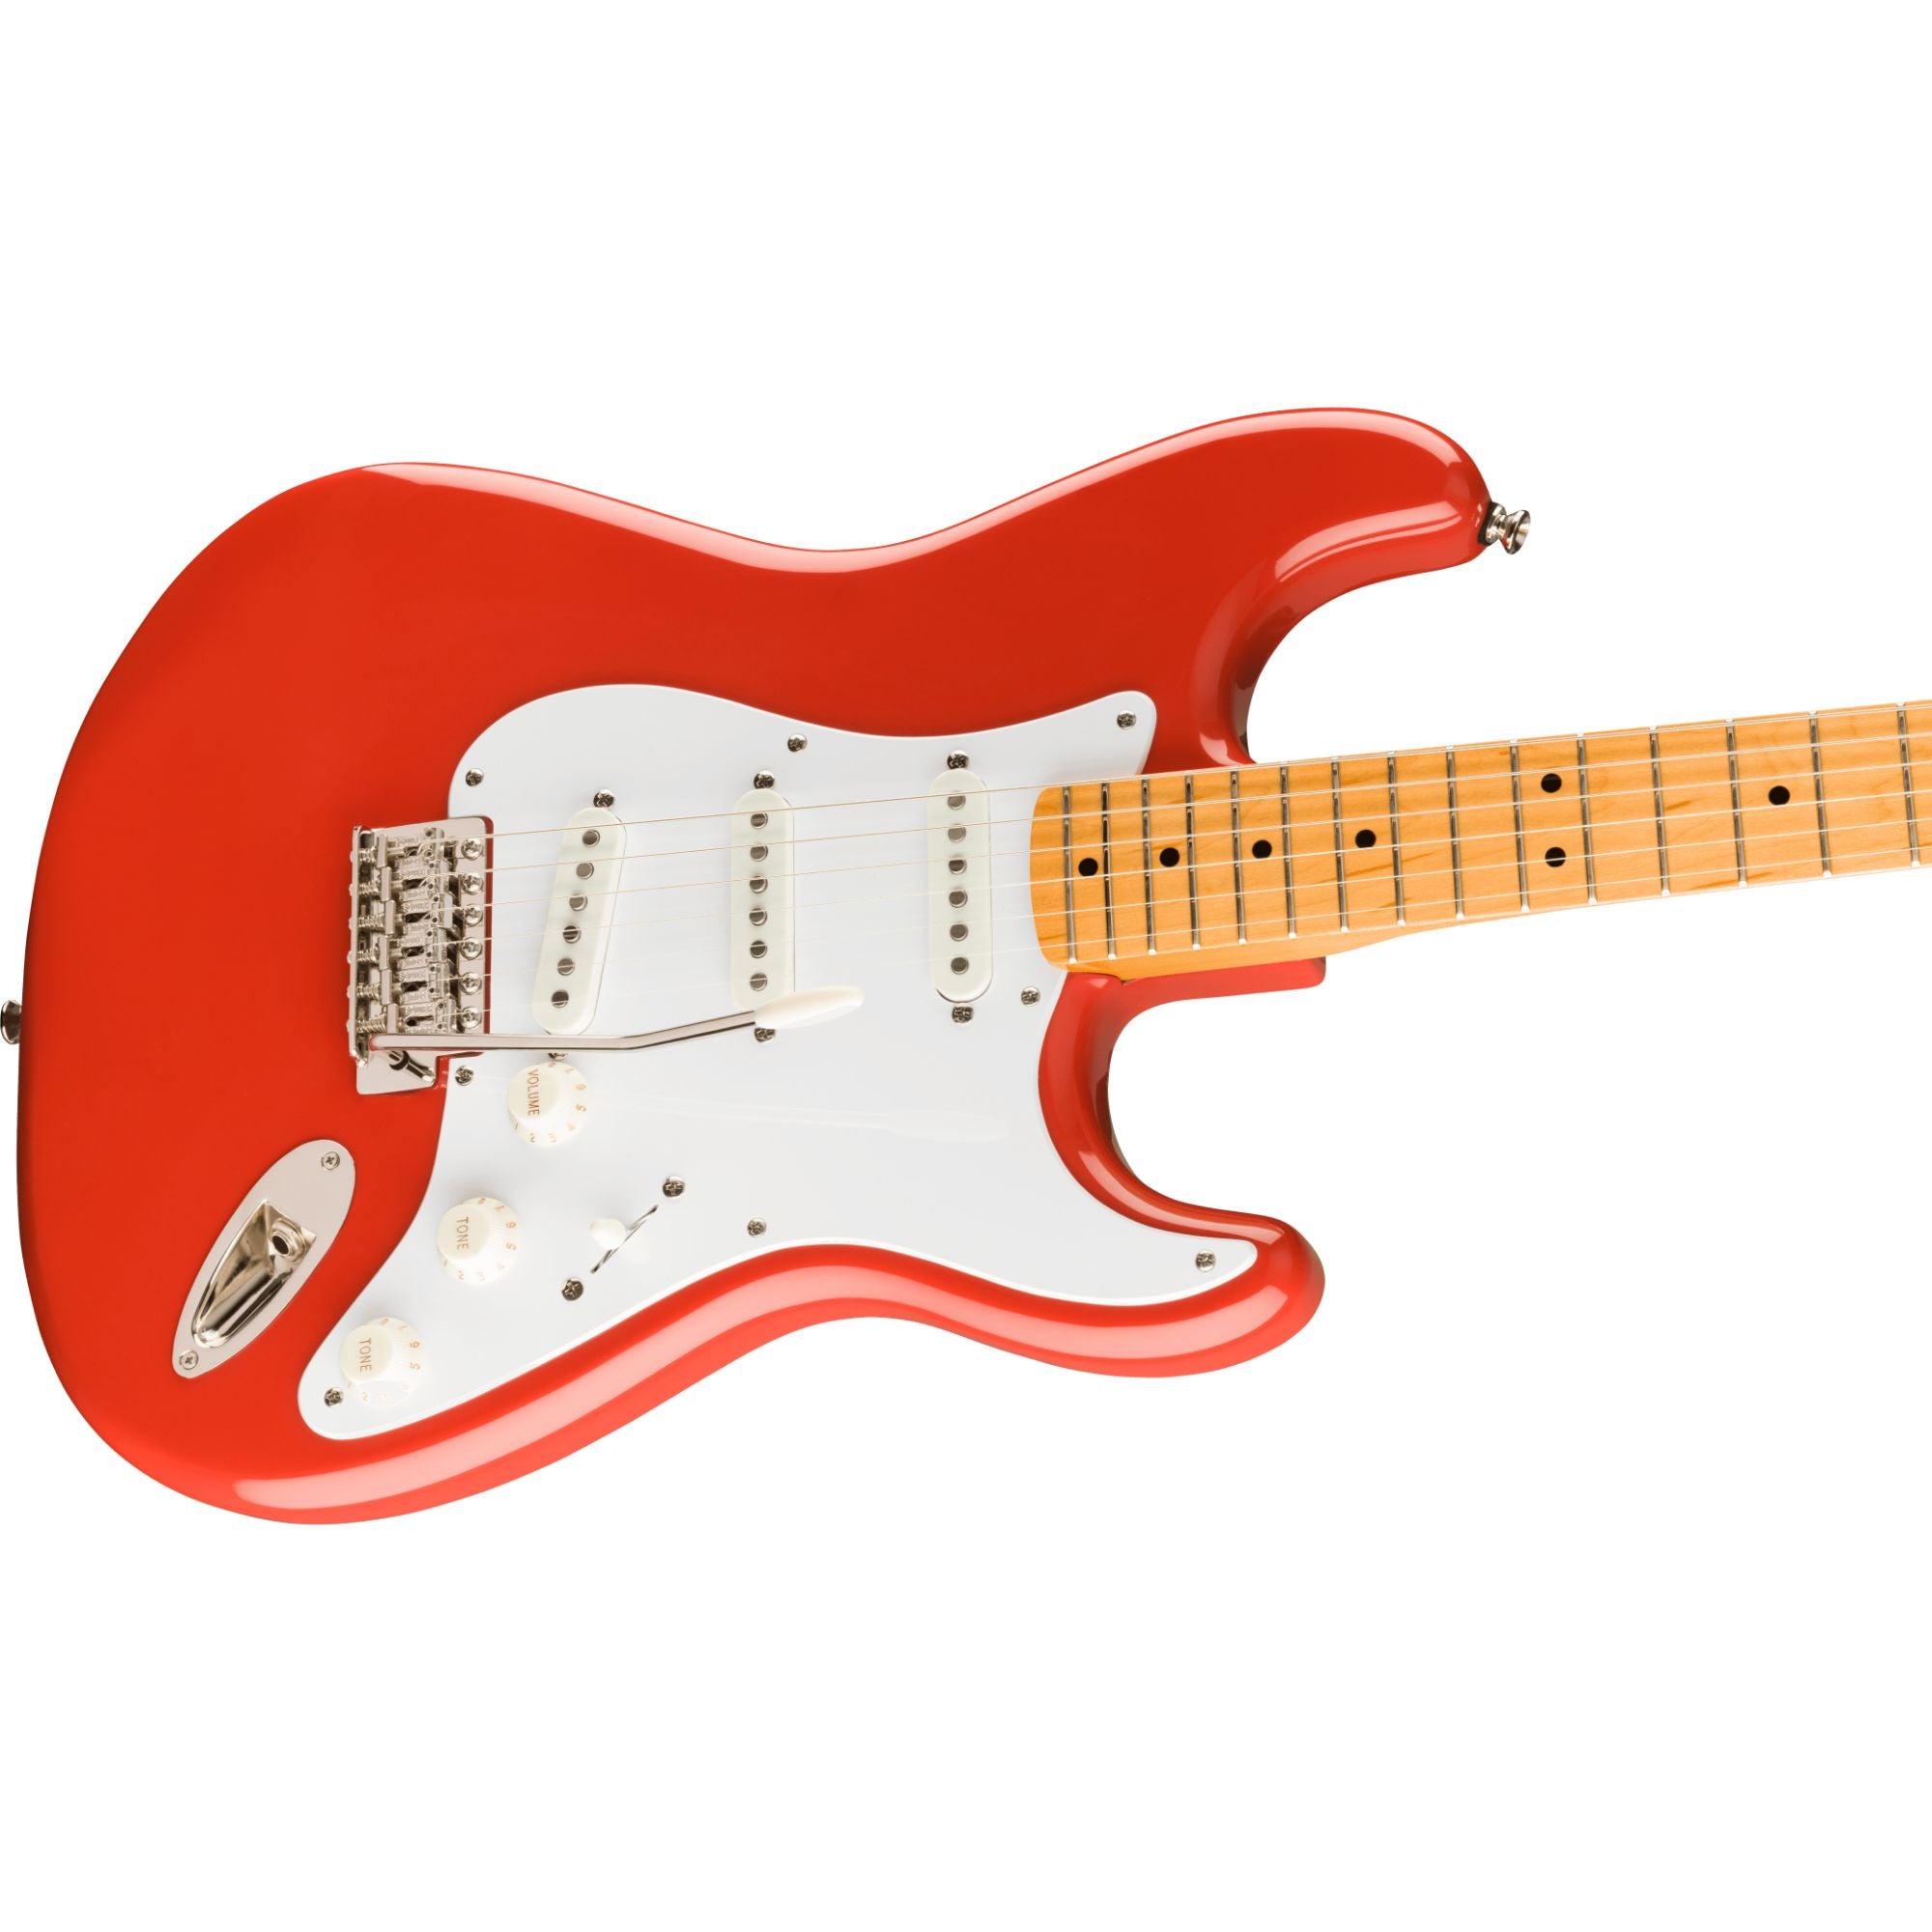 Squier Classic Vibe '50s Stratocaster, Fiesta Red